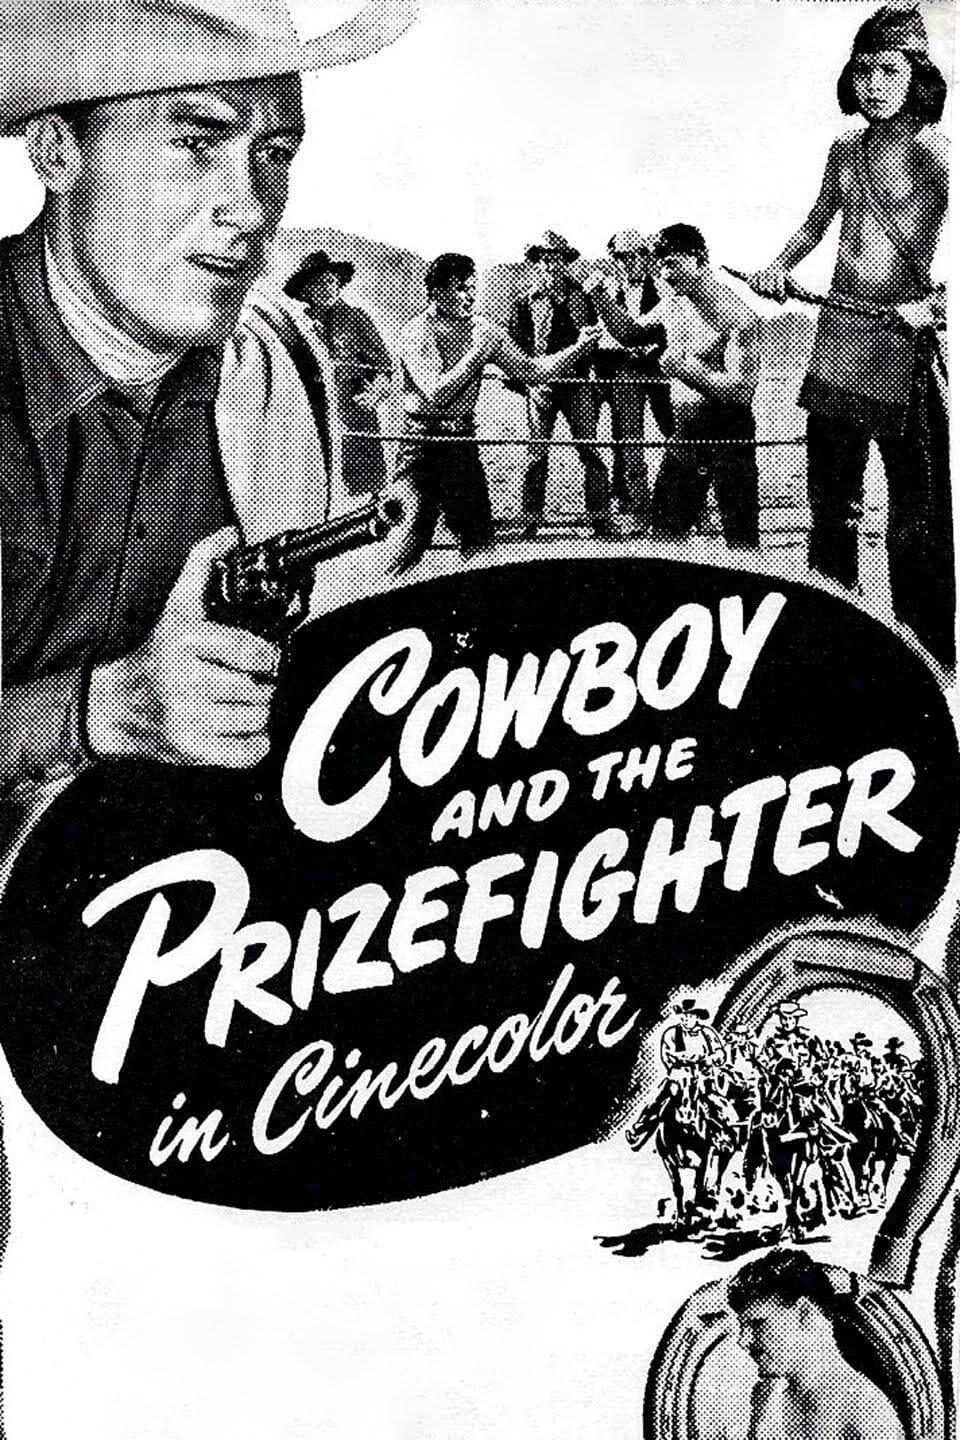 Cowboy and the Prizefighter poster